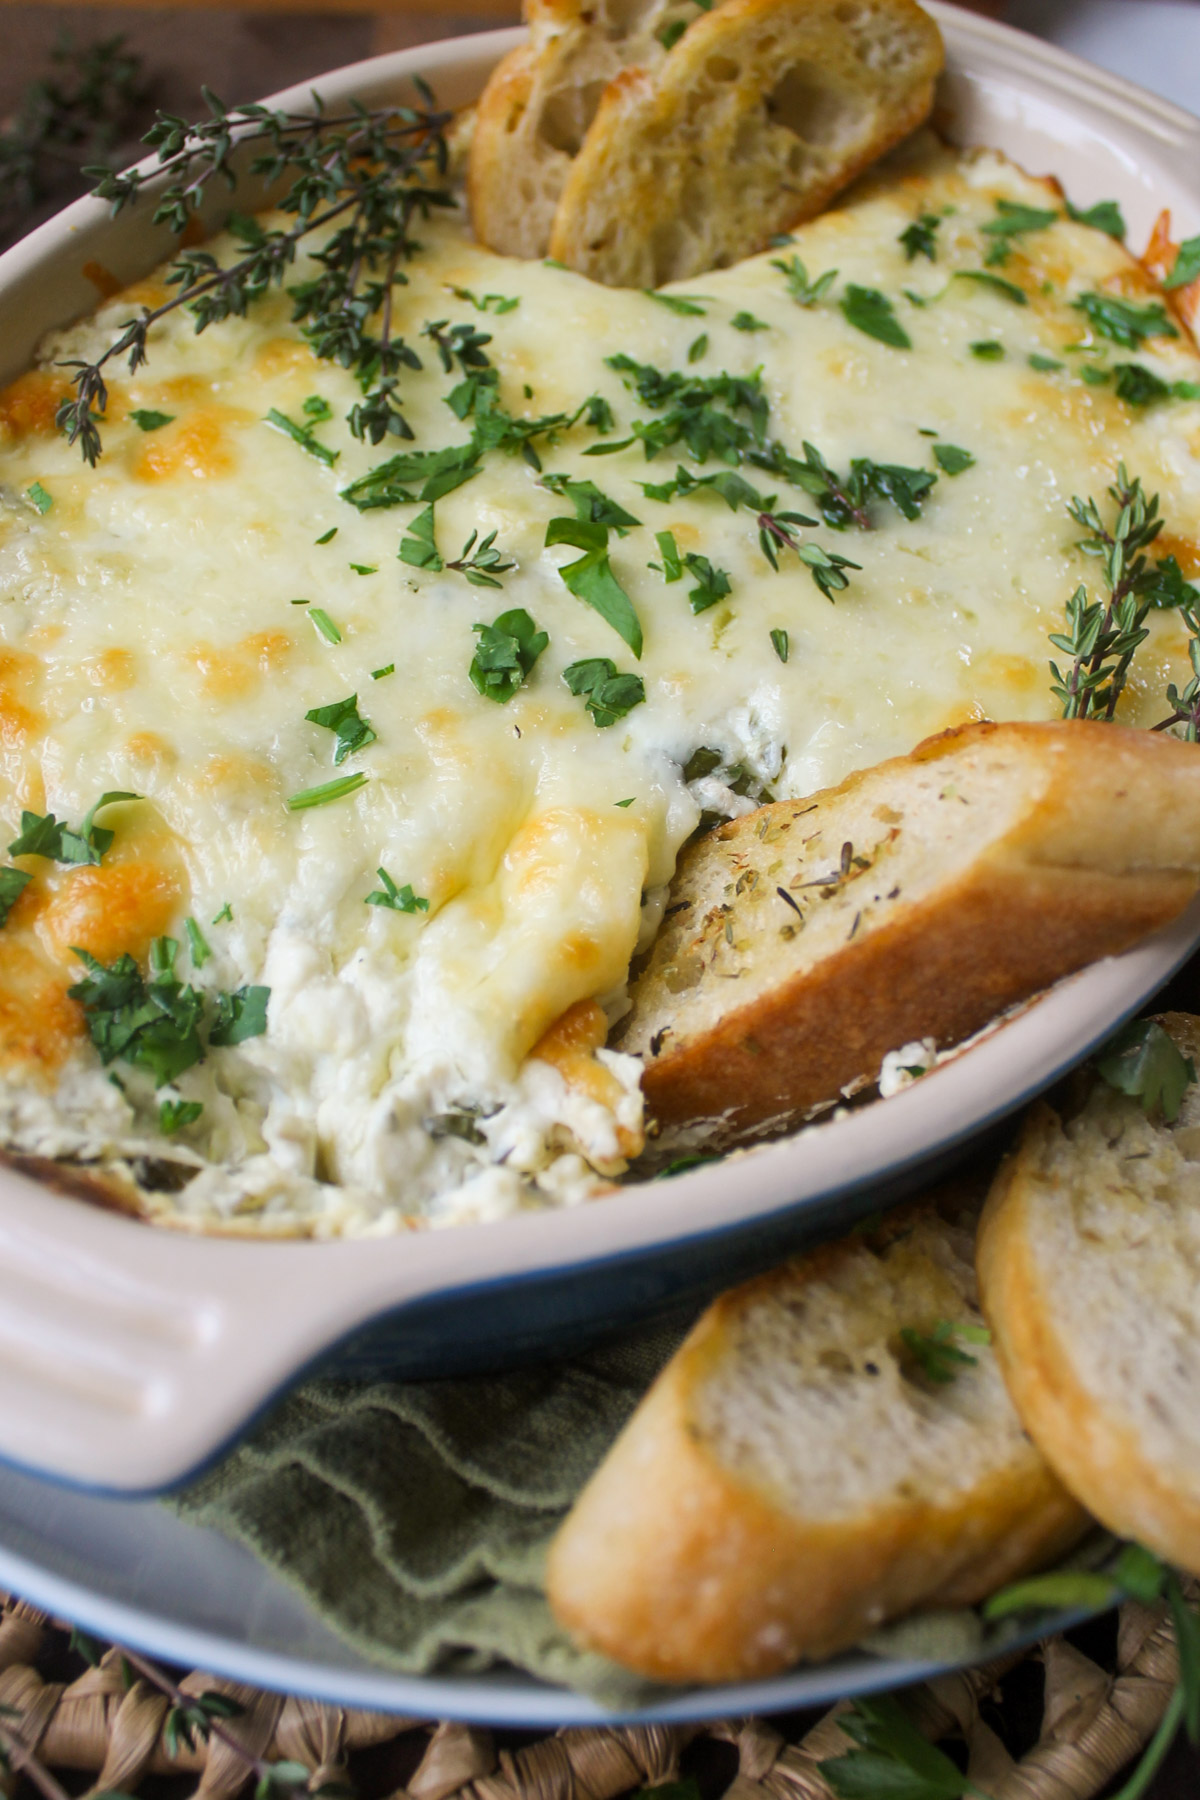 An oval baking dish of goat cheese artichoke dip with herbs and bread for dipping.